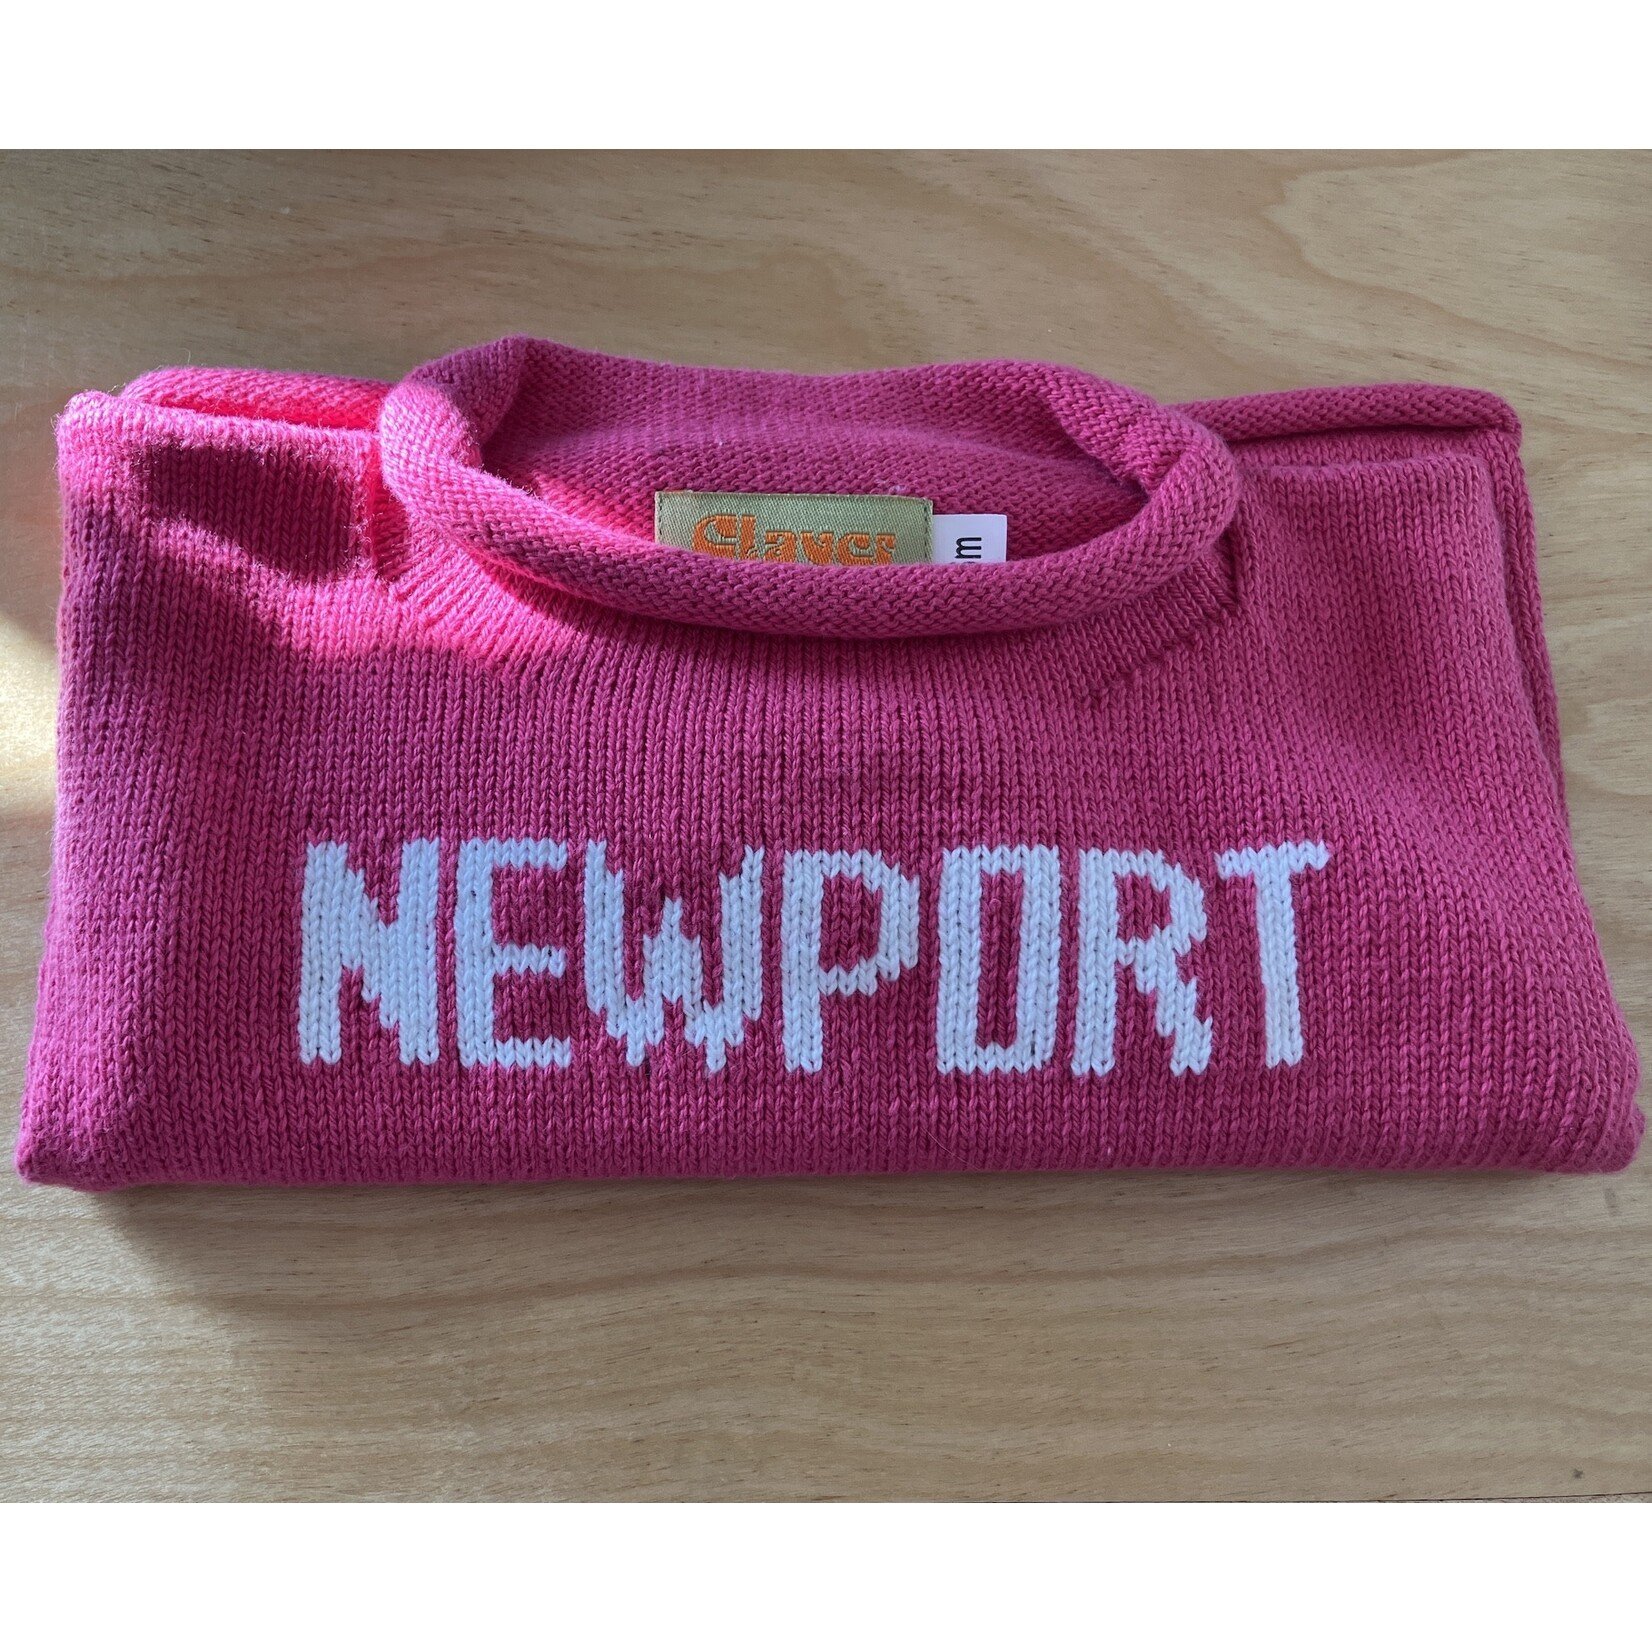 ACVISA/CLAVER Pink Knitted Newport Sweater